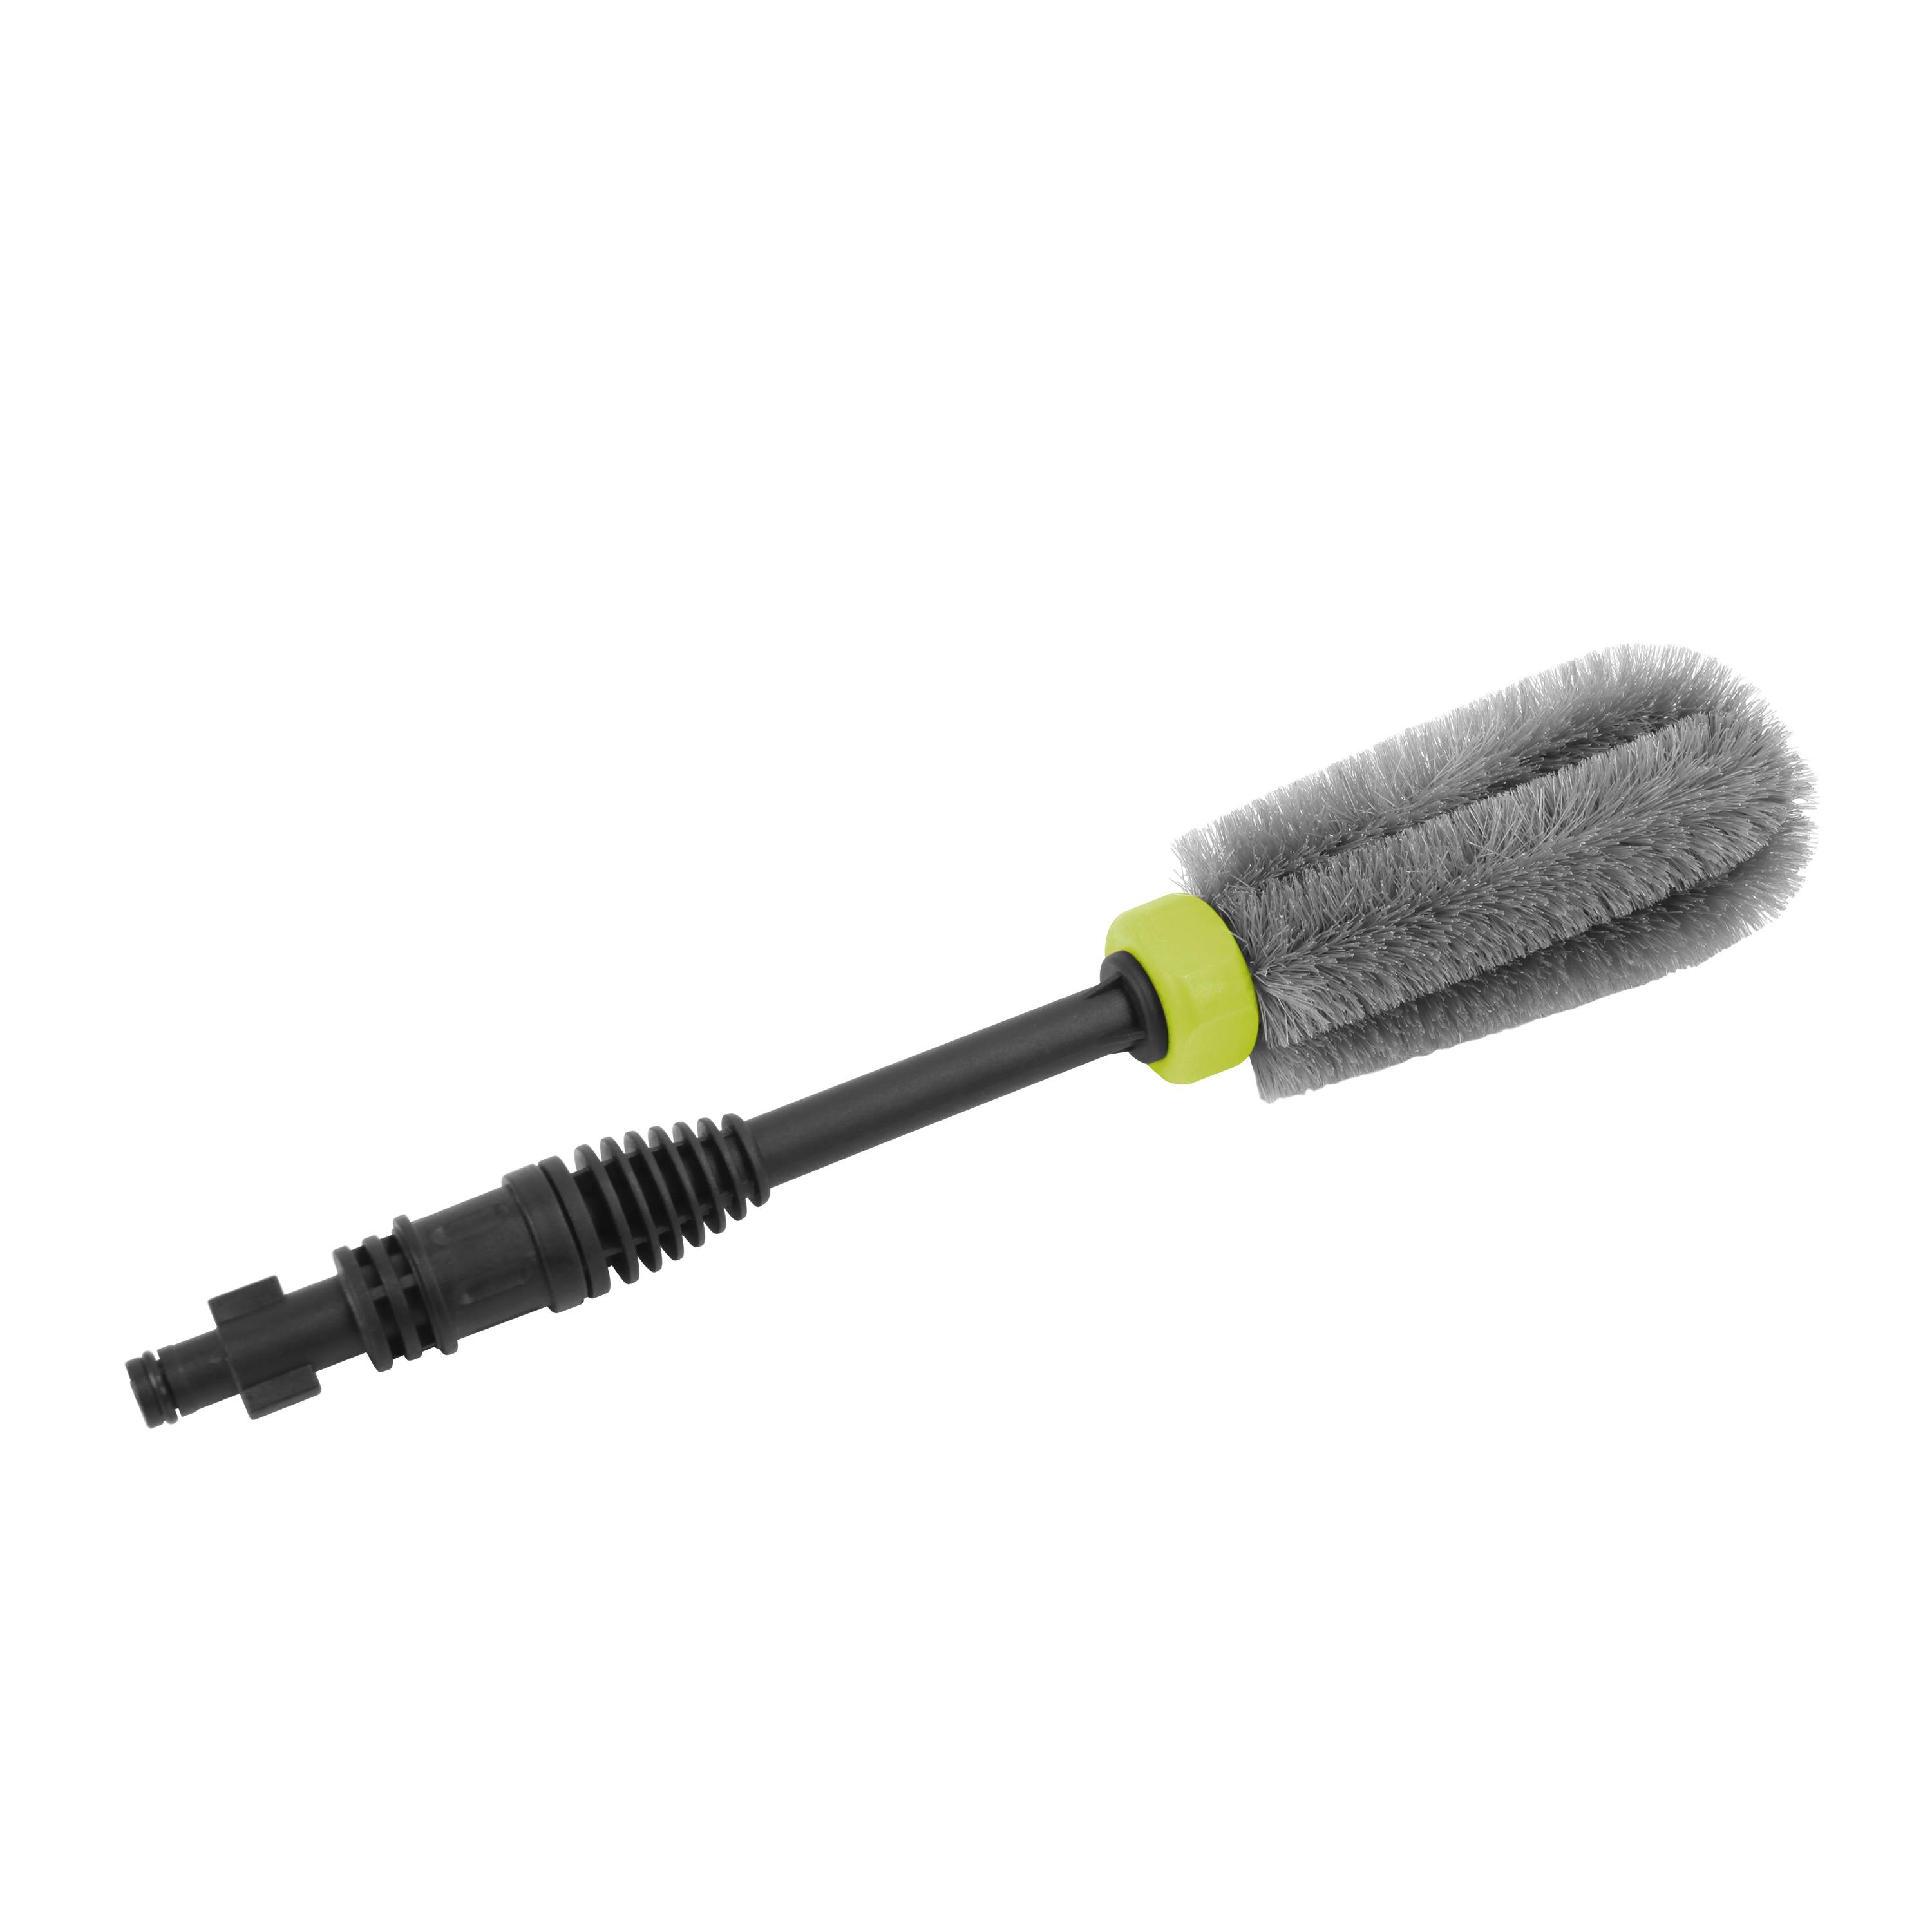 SPX-WB1 Universal Pressure Washer Wheel and Rim Brush for SP